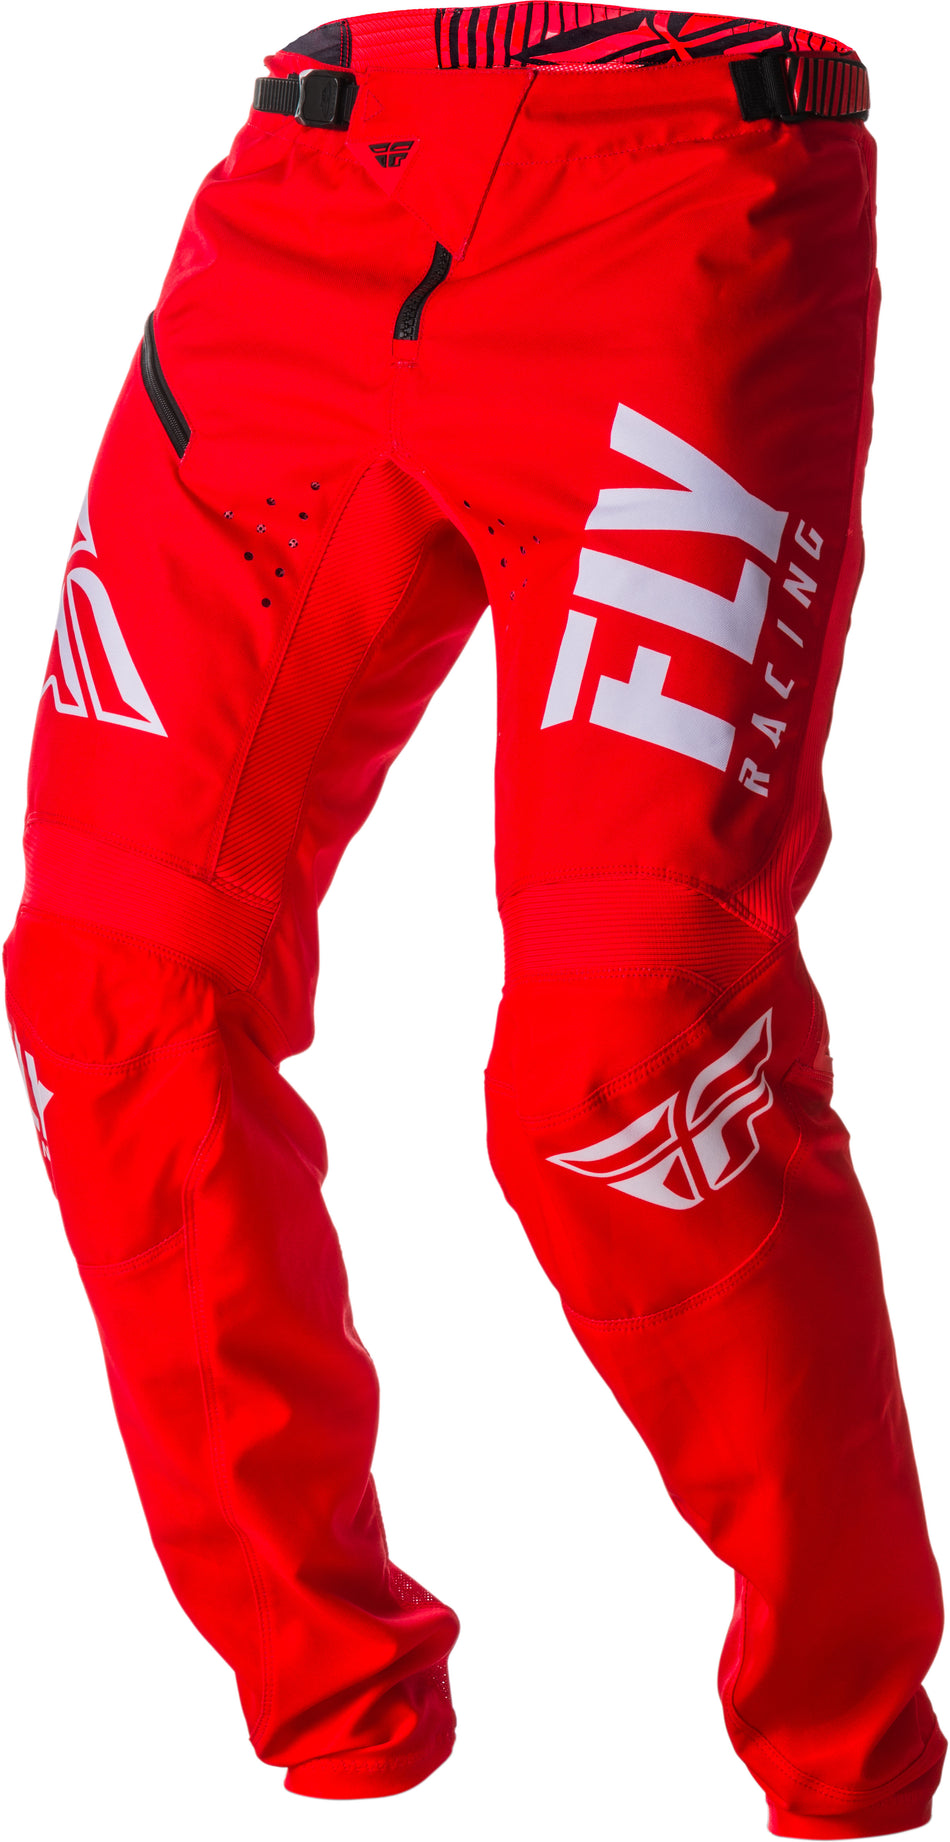 FLY RACING Kinetic Shield Bicycle Pants Red/White Sz 18 372-02218